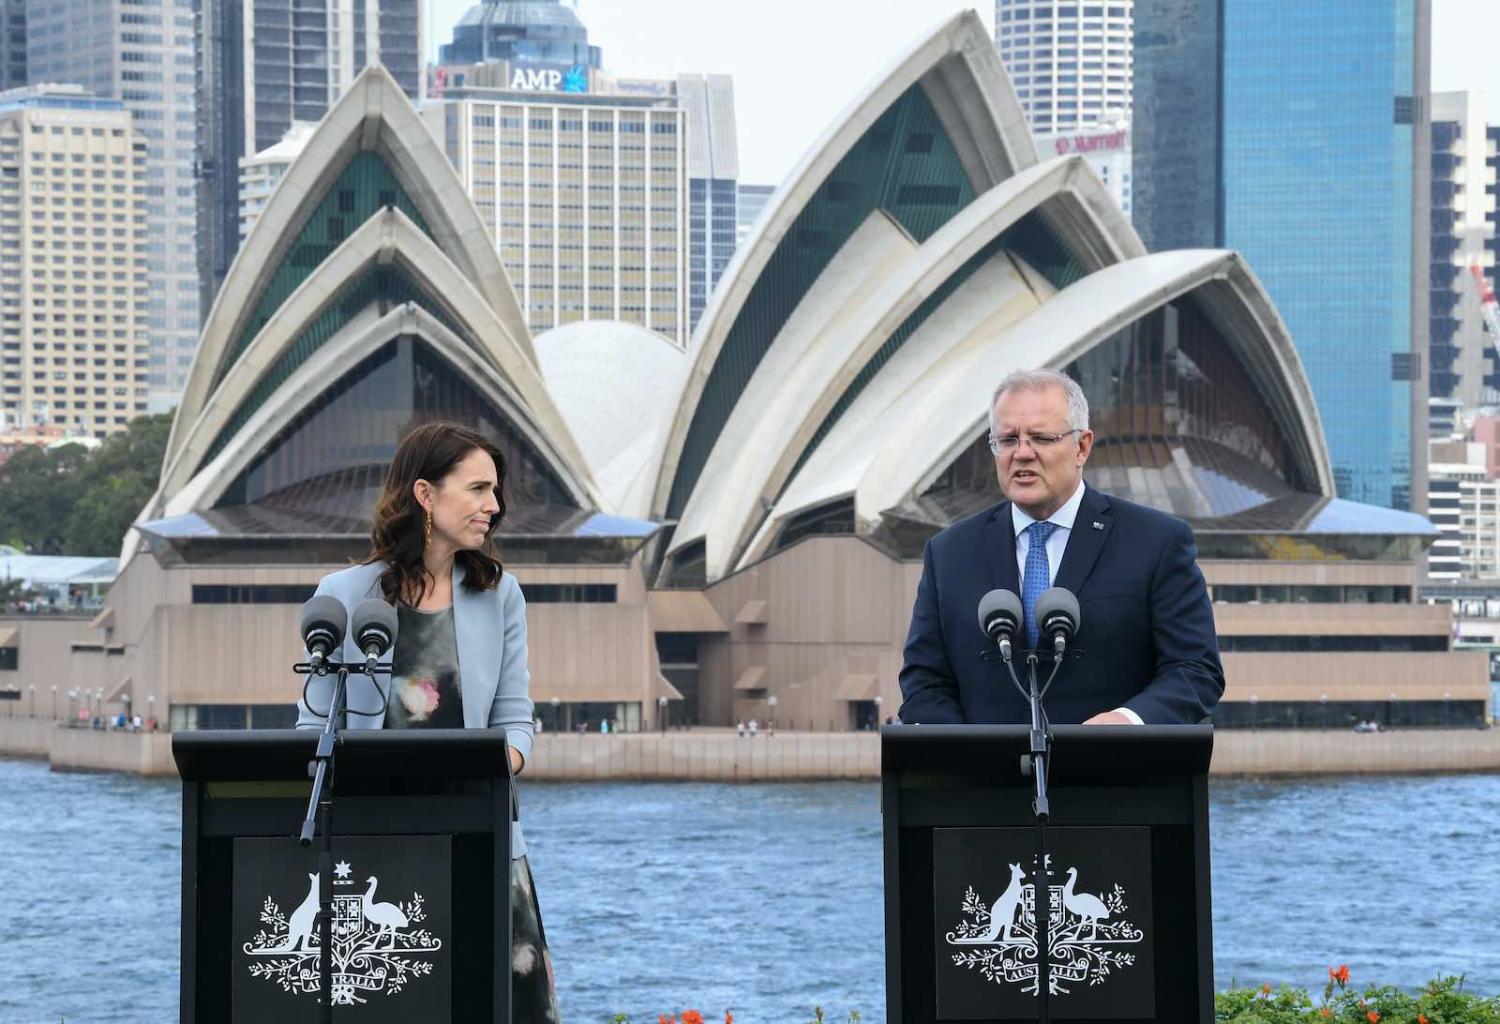 New Zealand Prime Minister Jacinda Ardern and Australian Prime Minster Scott Morrison during a February 2020 meeting in Sydney (James D. Morgan/Getty Images)